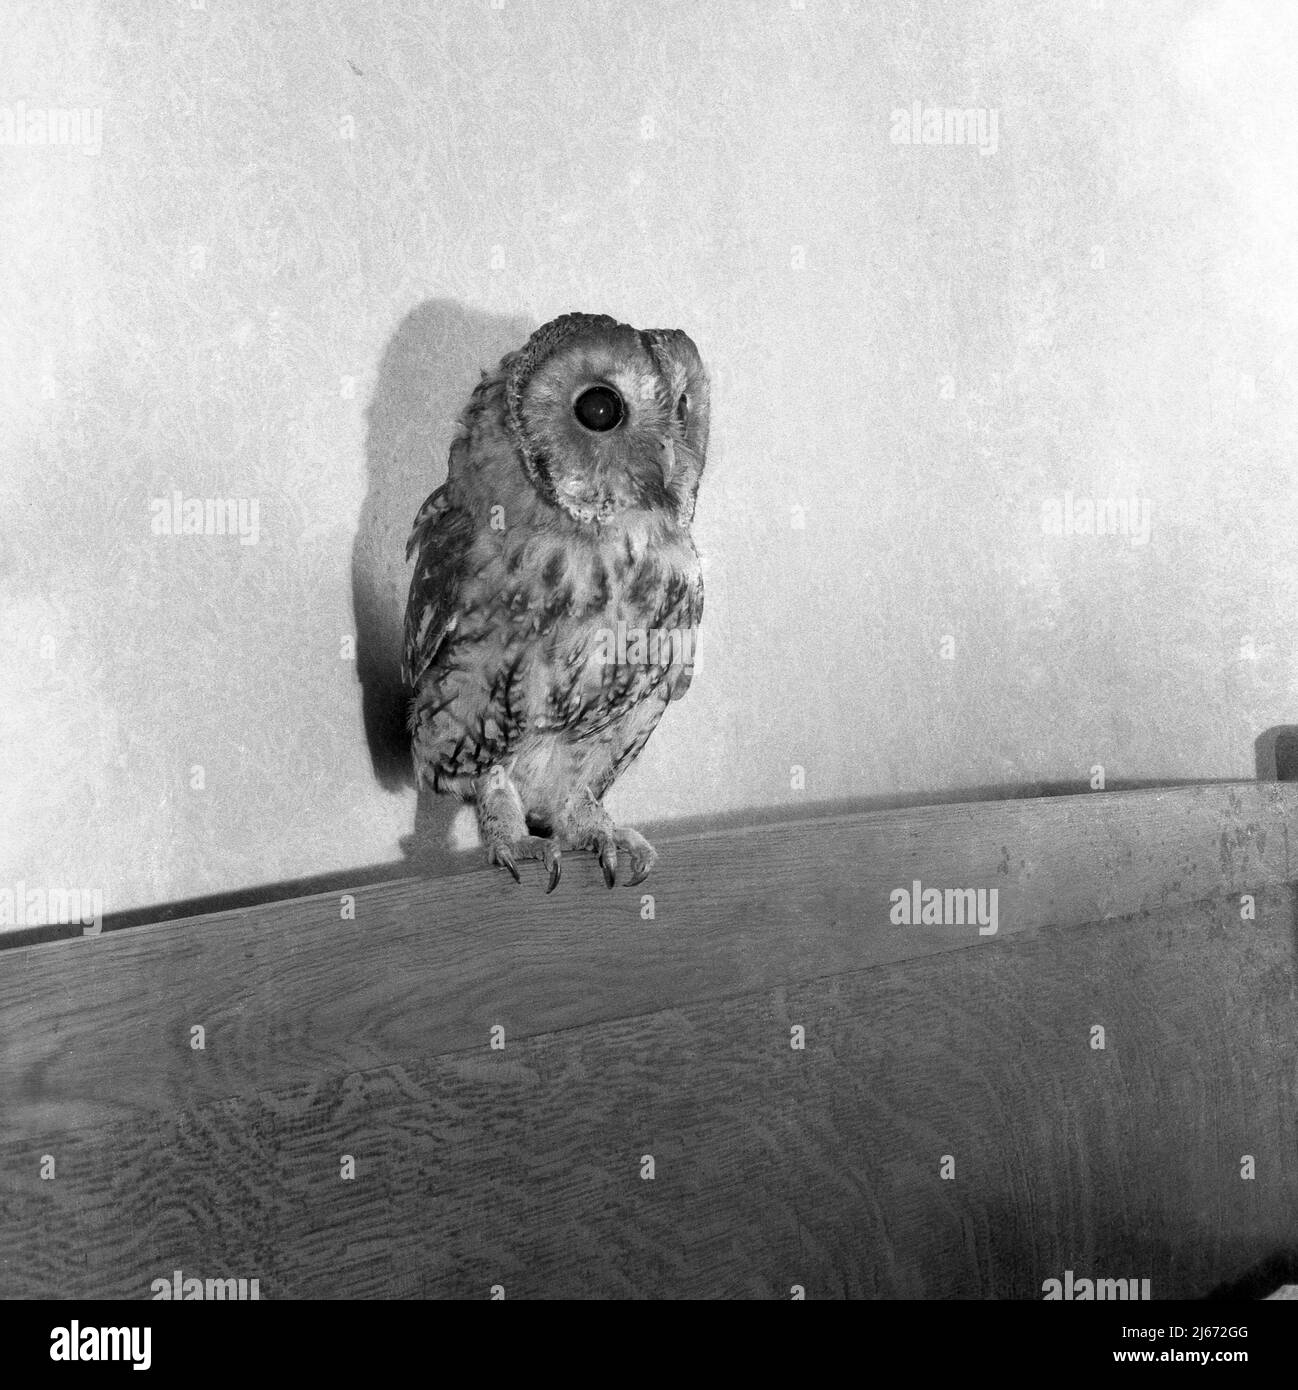 1960, hisorical, insde a room, a tawny owl standing, perched on a wooden headboard of a bed, England, UK. Stock Photo